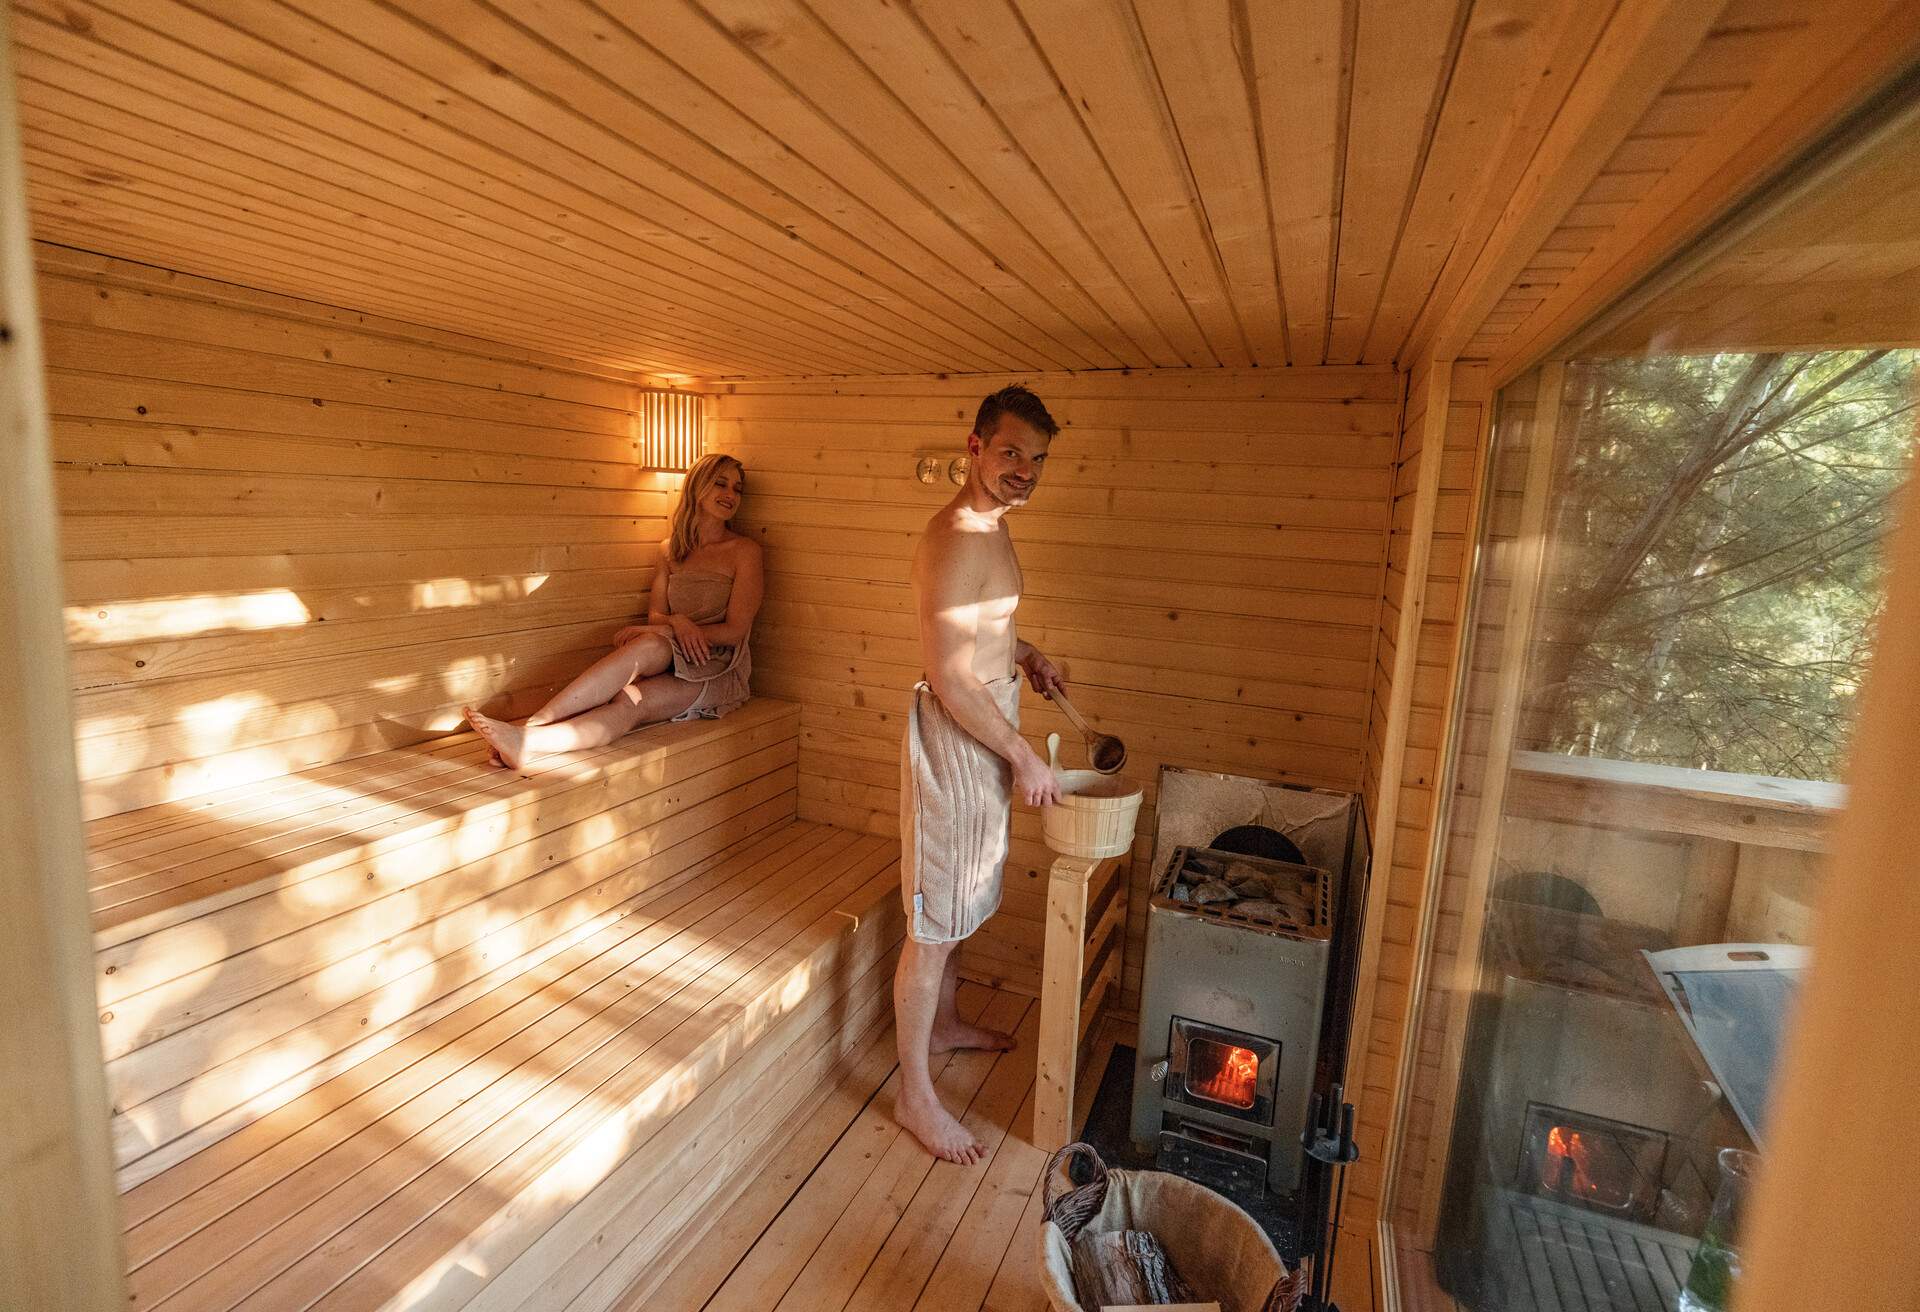 THEME_SPA_WELLNESS_FINNISH_SAUNA_PEOPLE_COUPLE_GettyImages-1453388419